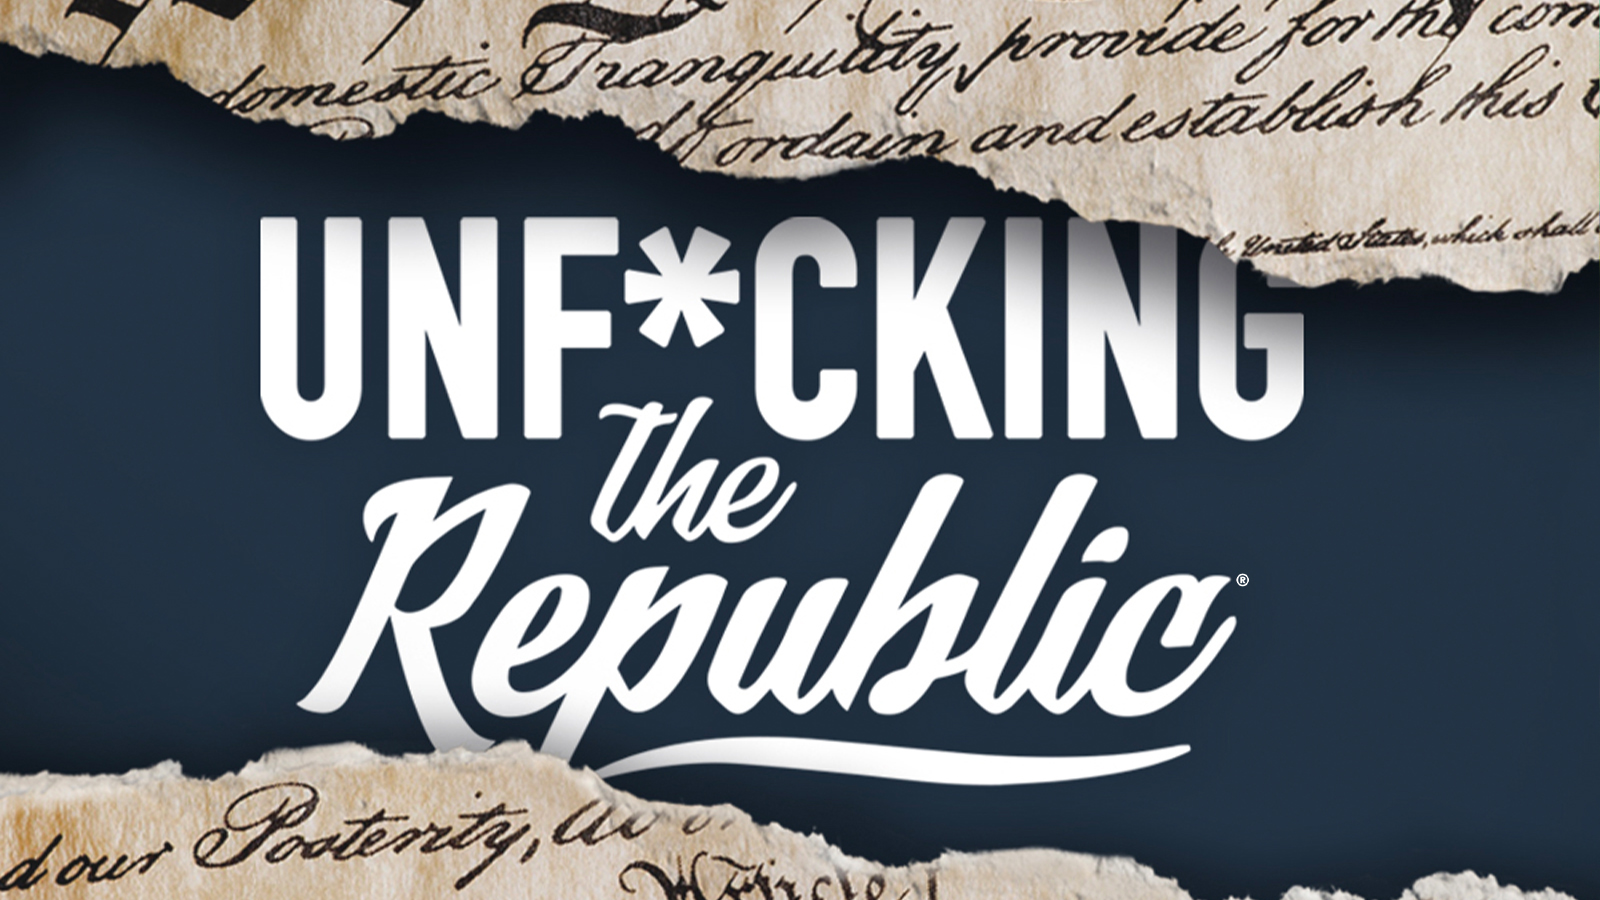 The U.S. Constitution ripped in the middle revealing white text on a blue background that says, ‘Unf*cking the Republic®.’